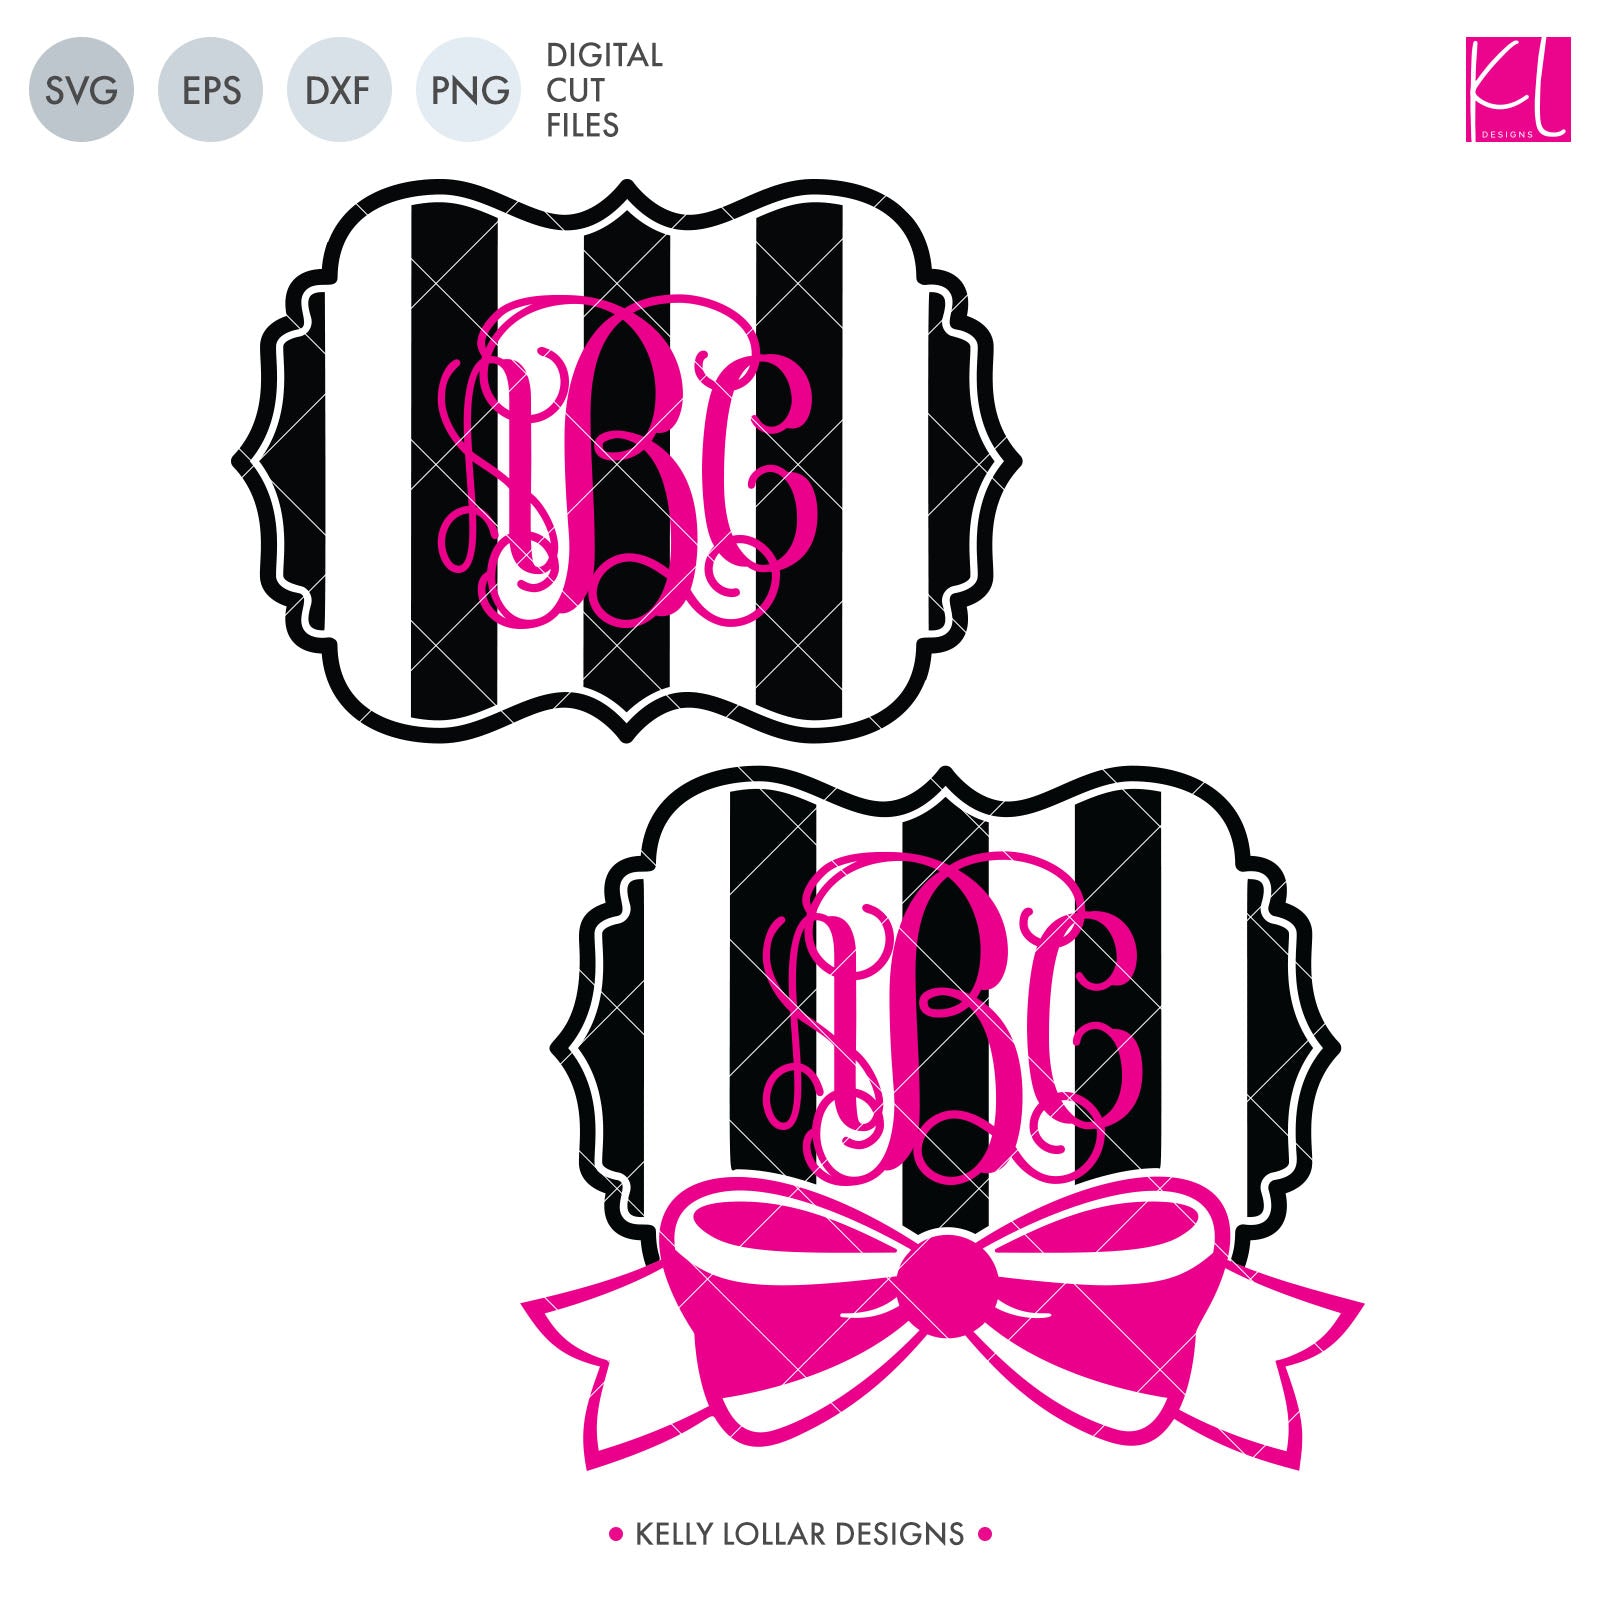 Striped Monogram with Bow SVG Cut File | Kelly Lollar Designs